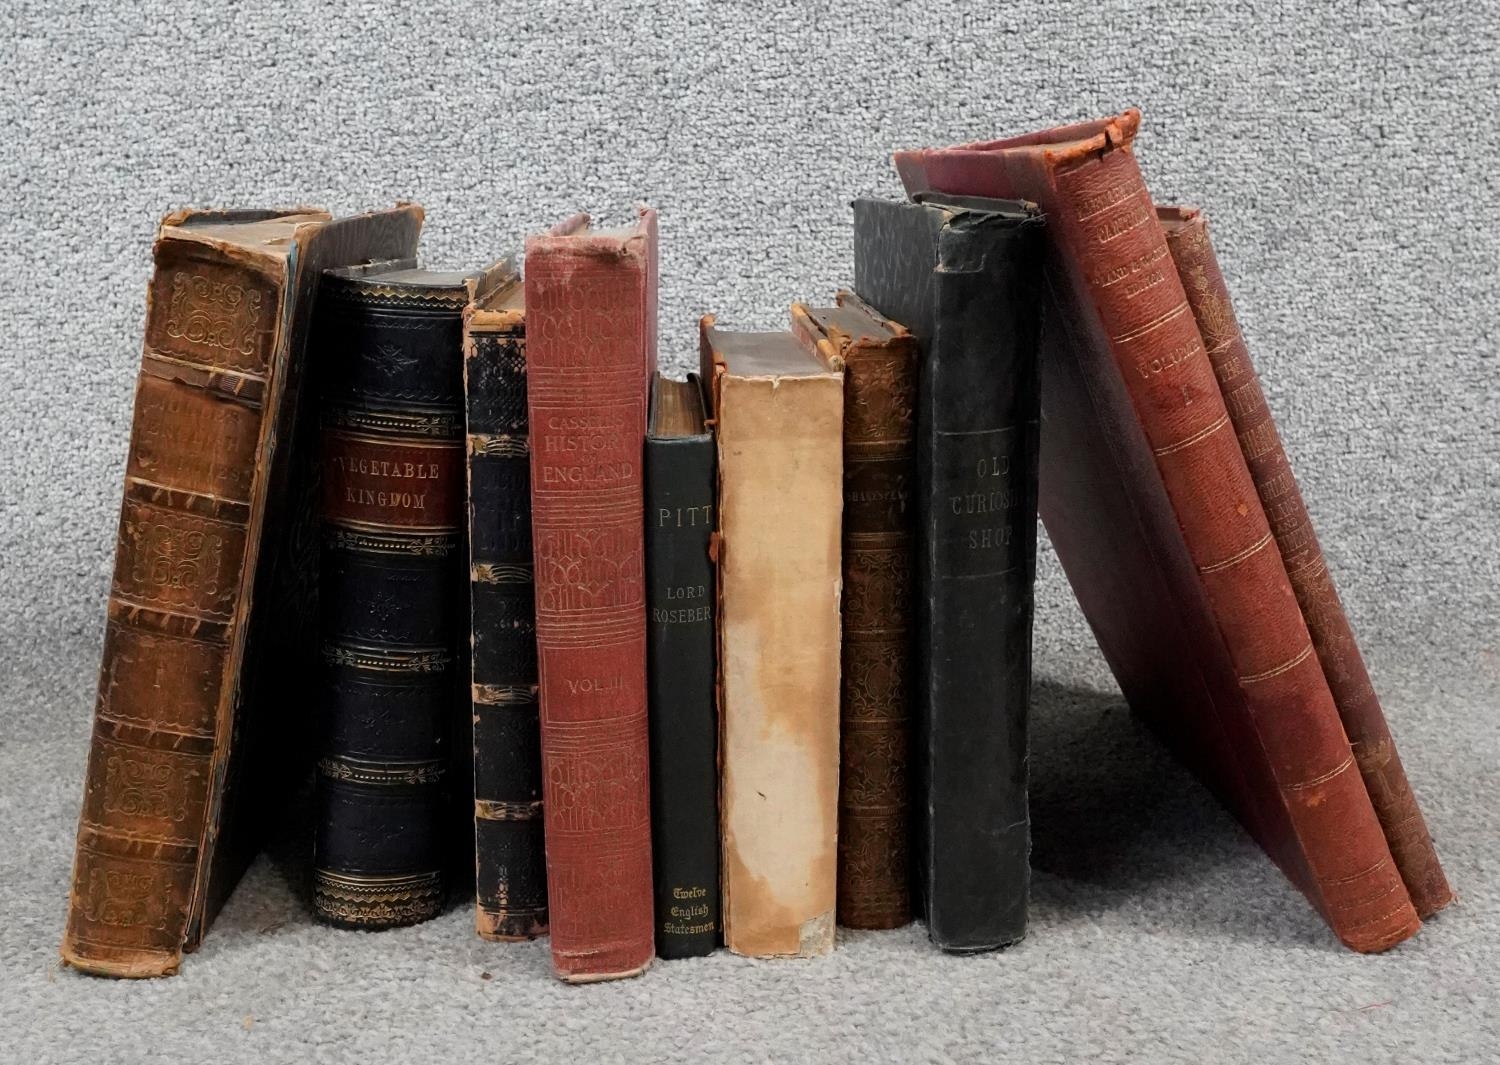 A collection of ten antique books. Including Vegetable Kingdom, The Old Curiosity Shop and Classic